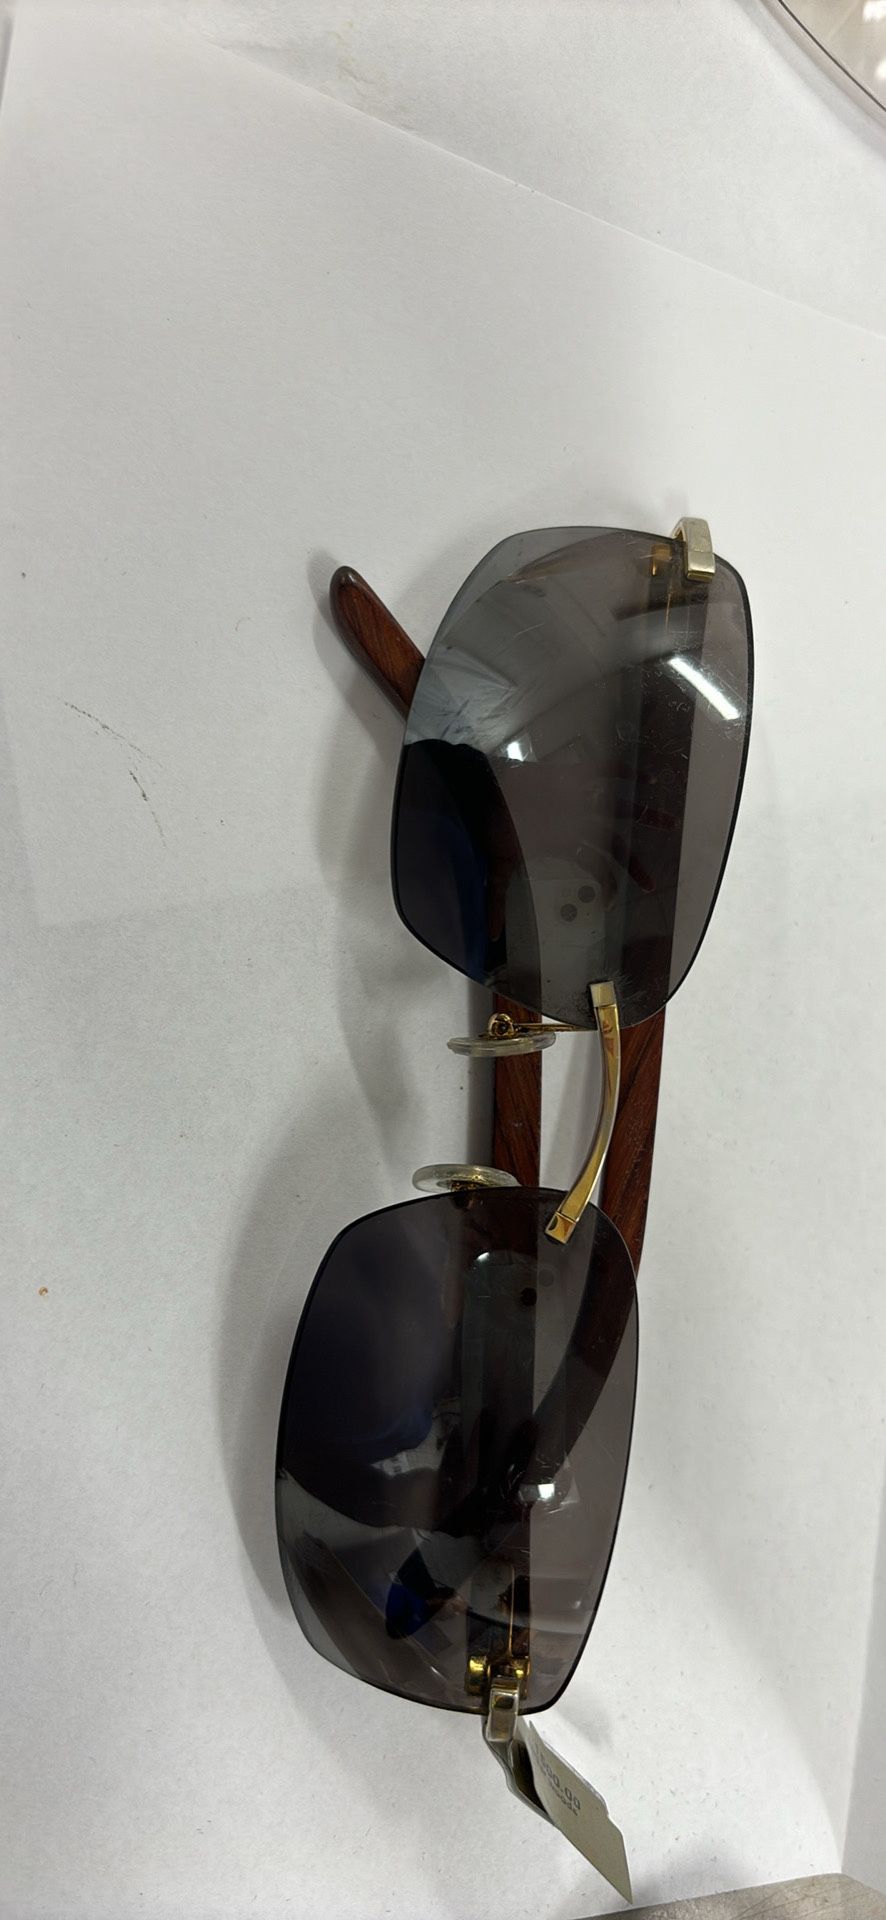 Cartier sunglasses with wood arms